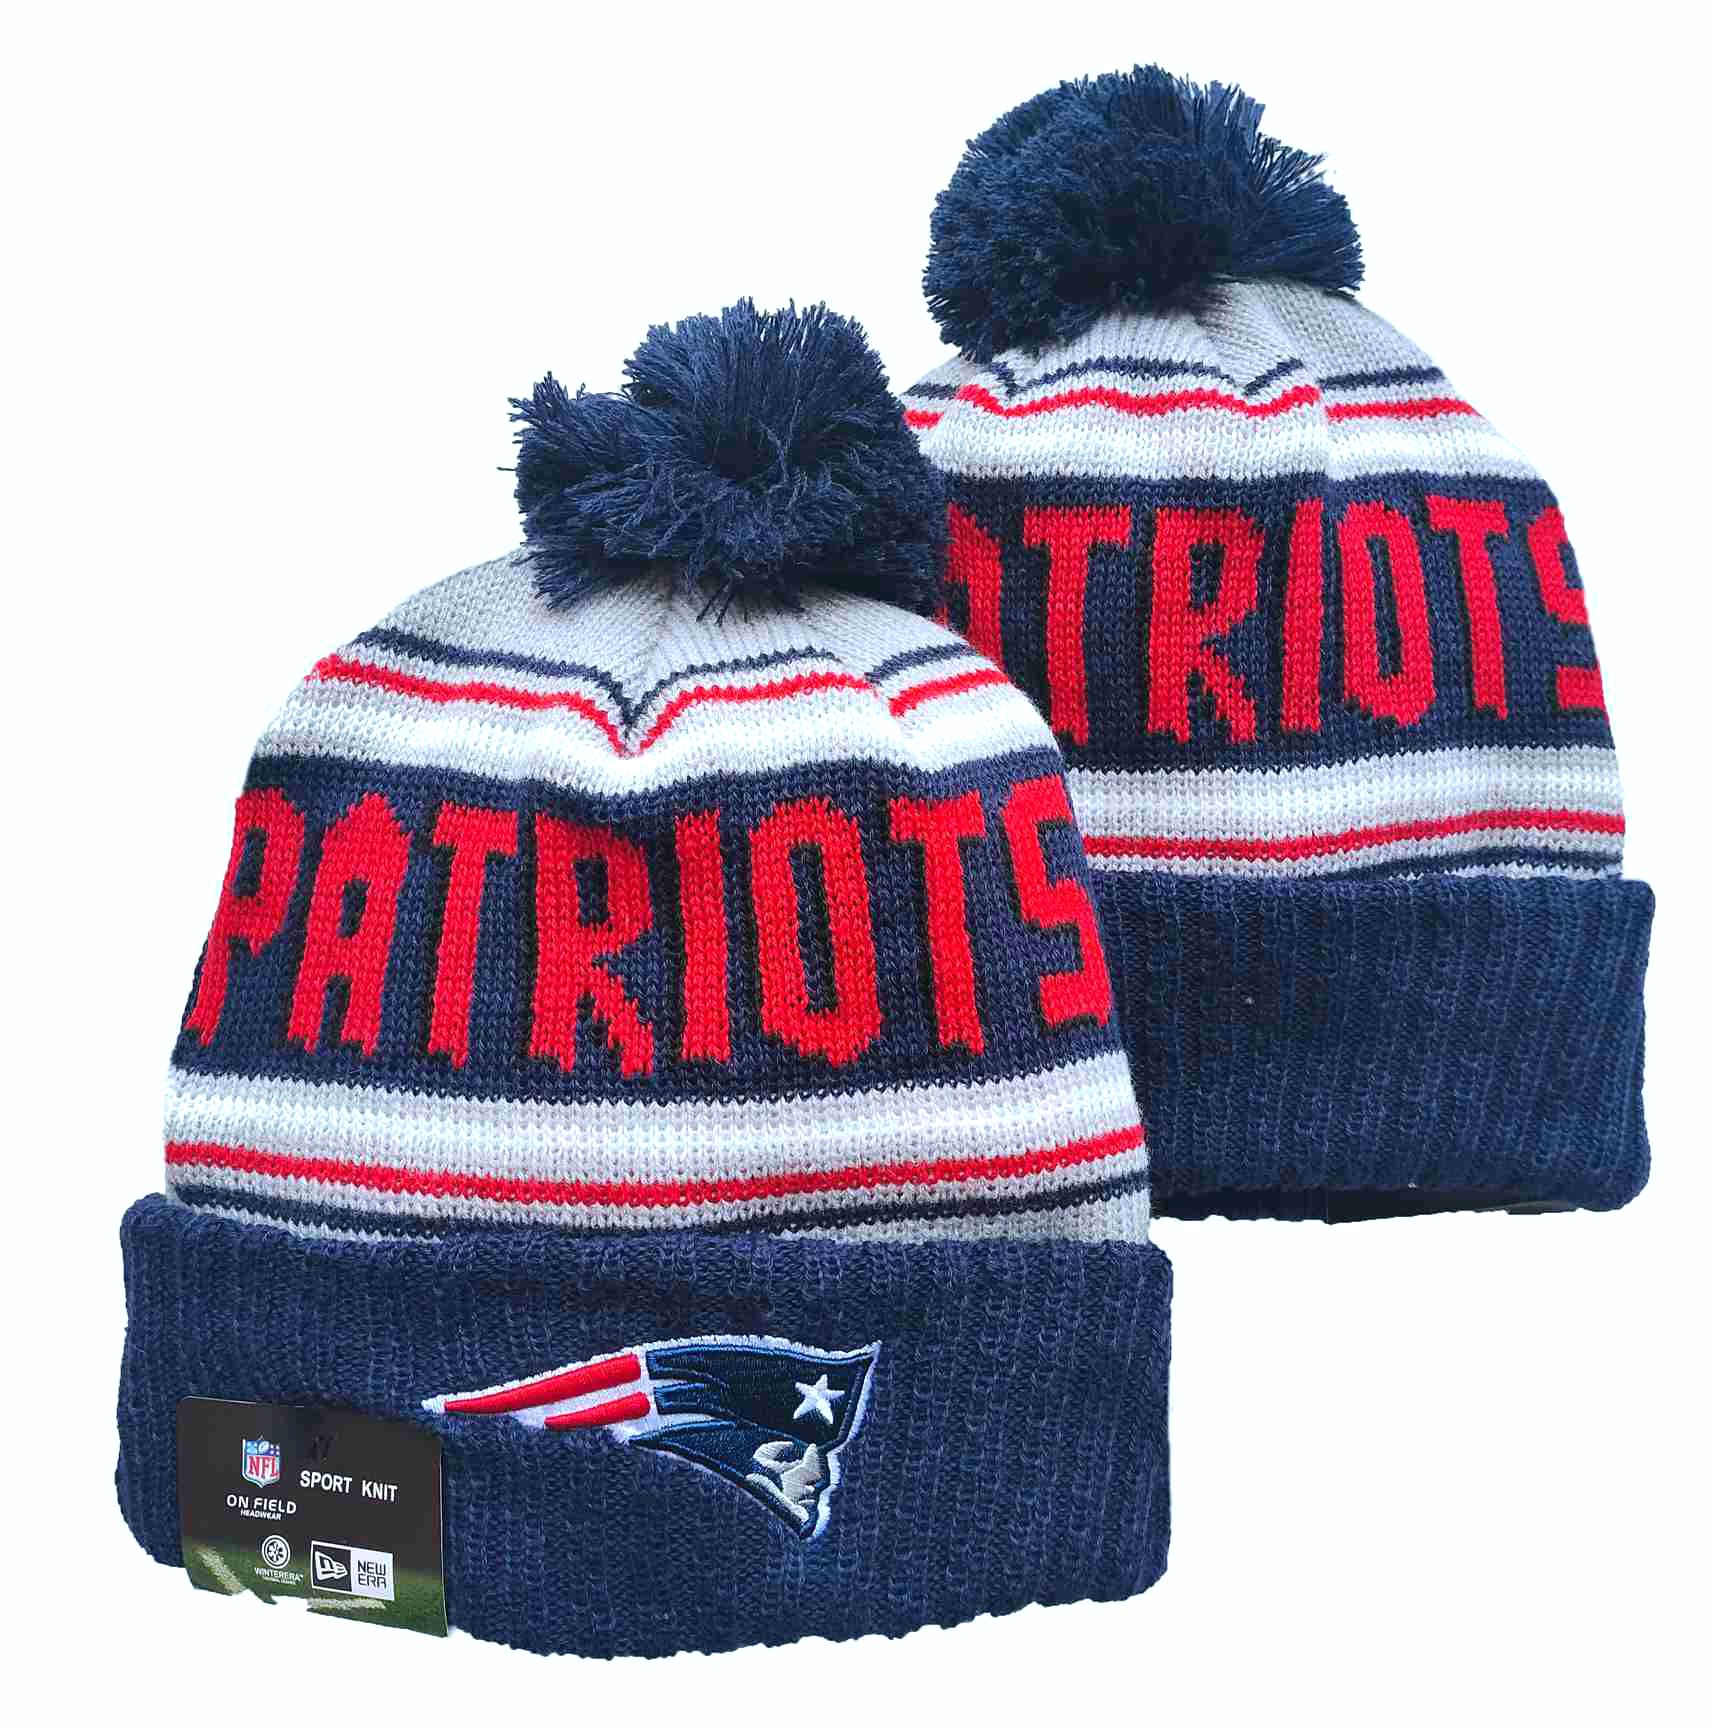 NFL New England Patriots Beanies Knit Hats-YD1243